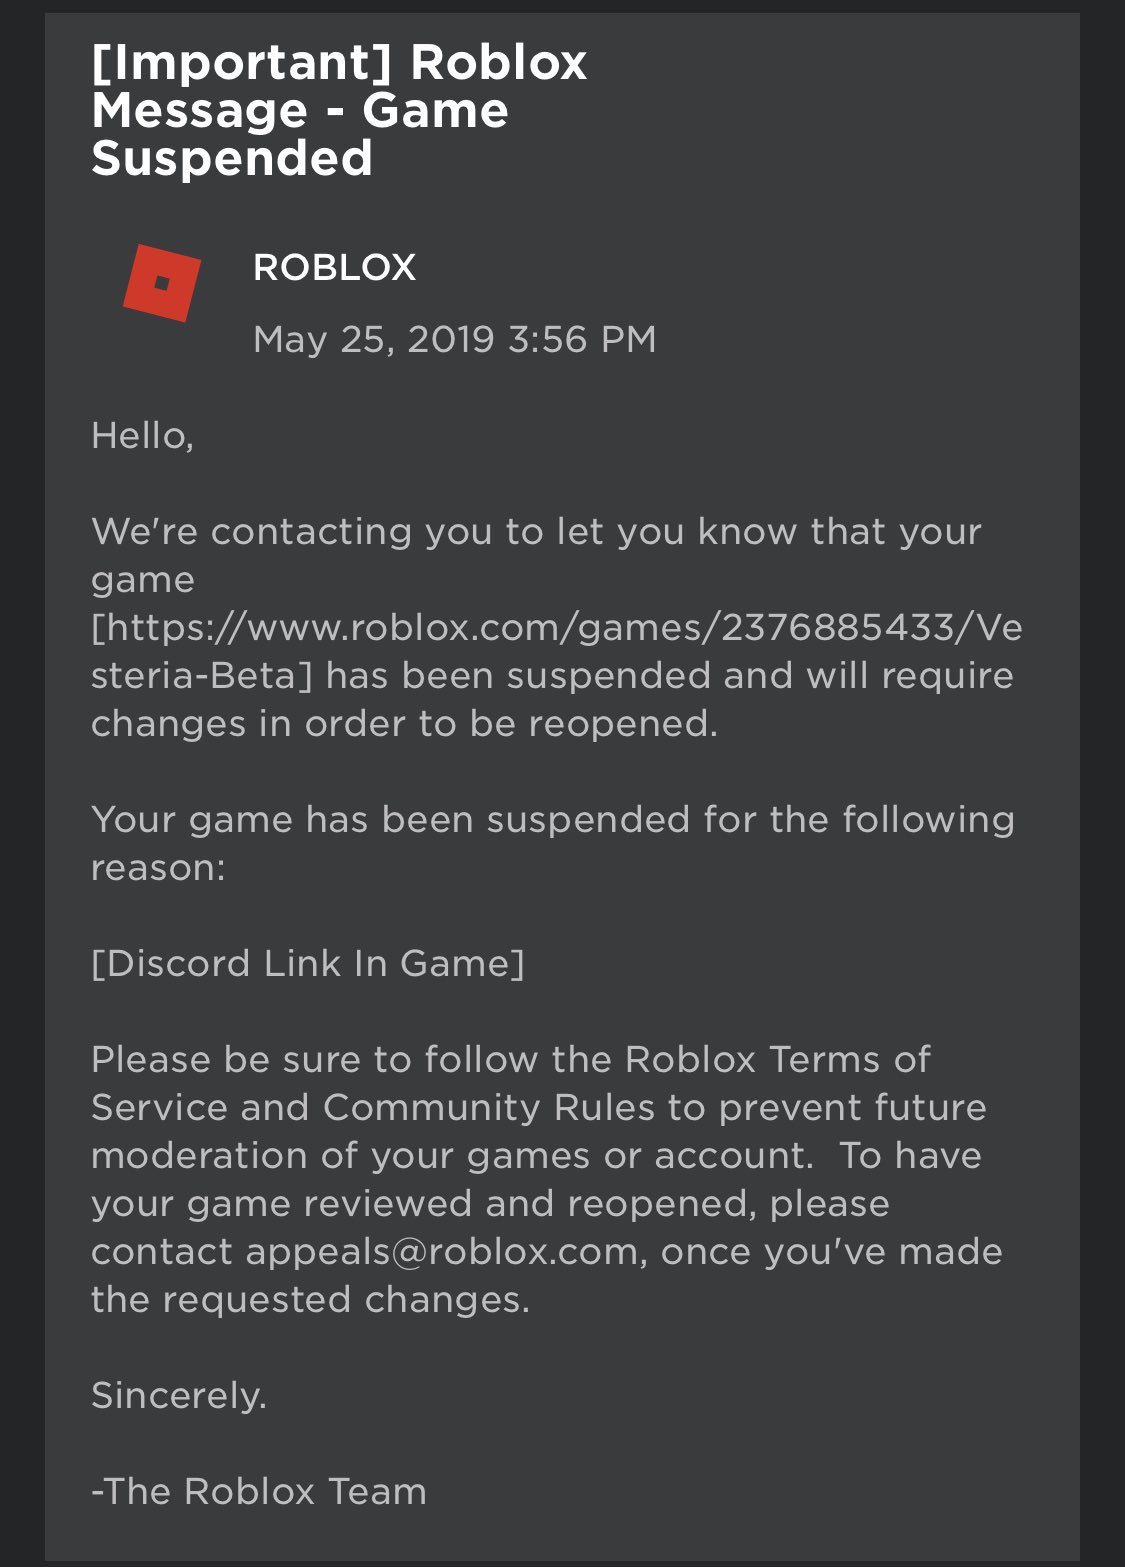 Andrew Bereza On Twitter World Zero Has Discord Code In Their Front Page Menu For Months Moderation Vesteria Puts Code Not Link In Our Intro Mods Https T Co Lkbw2vpl2v - roblox account verification discord